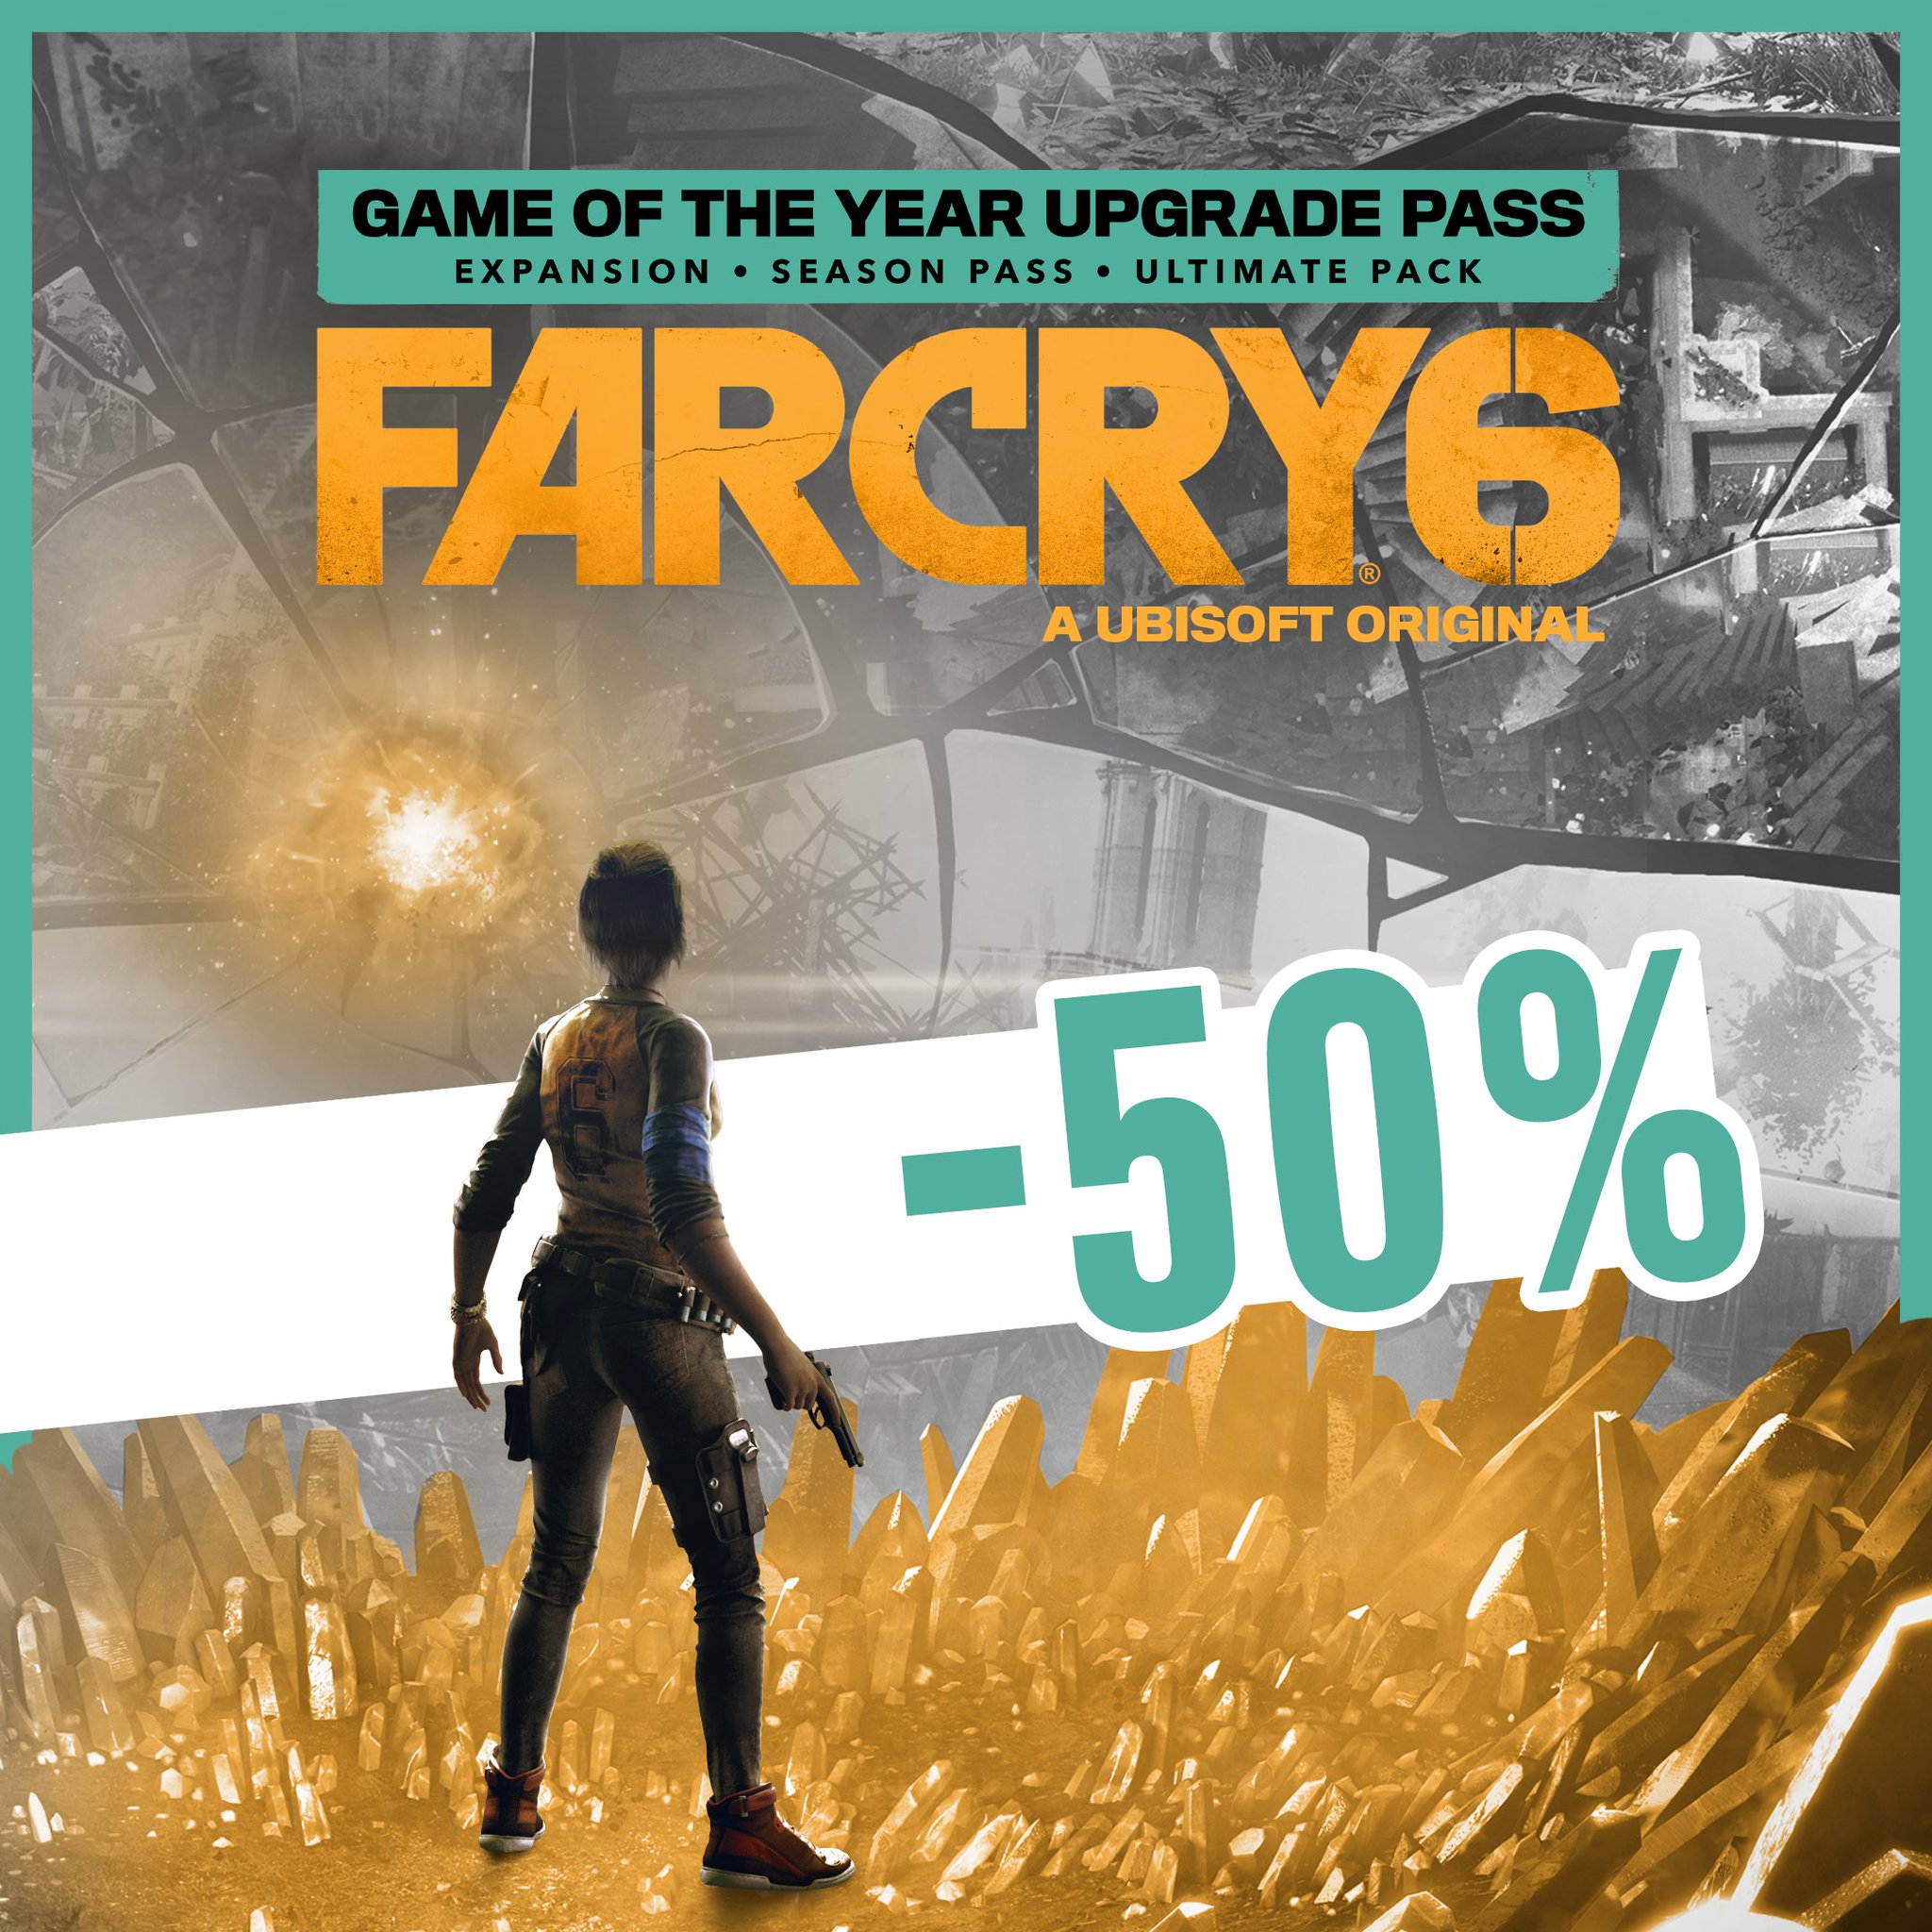 Buy Far Cry® 6 Game of the Year Upgrade Pass